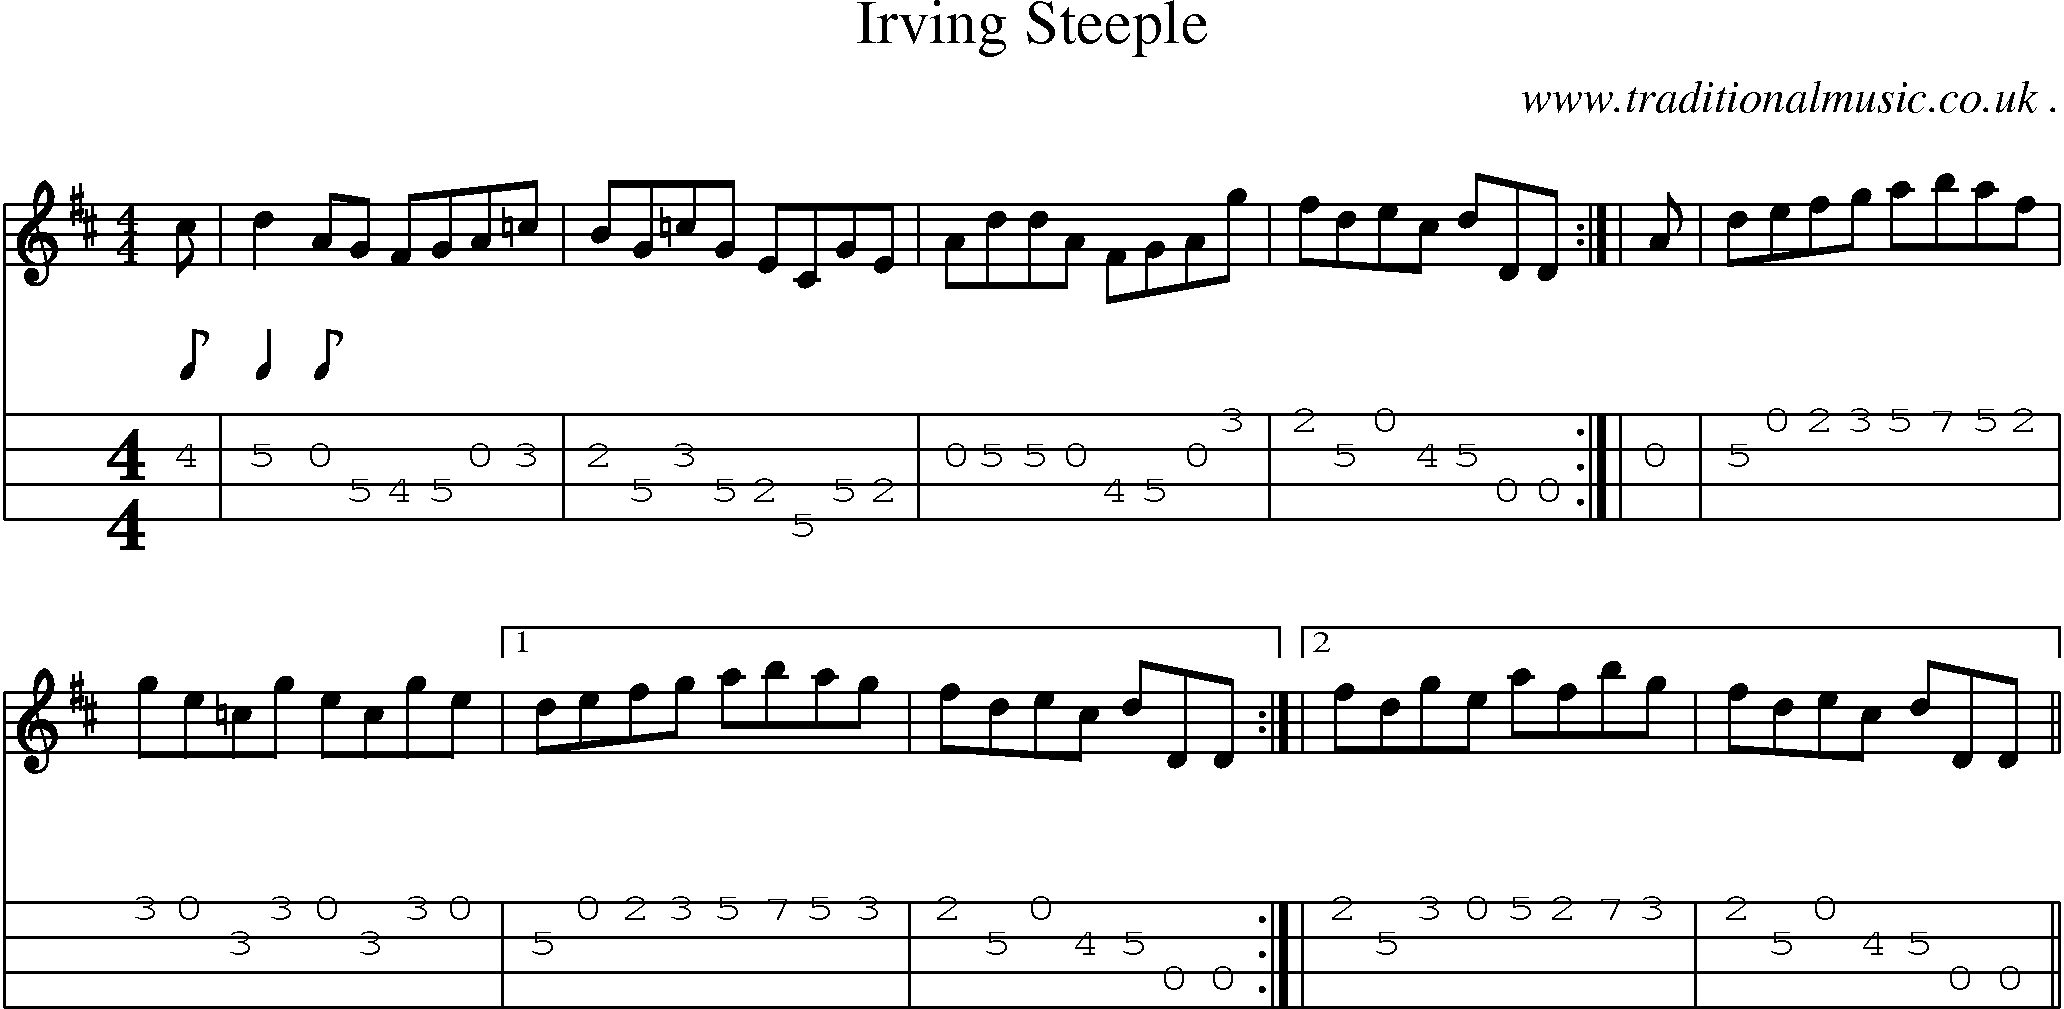 Sheet-Music and Mandolin Tabs for Irving Steeple